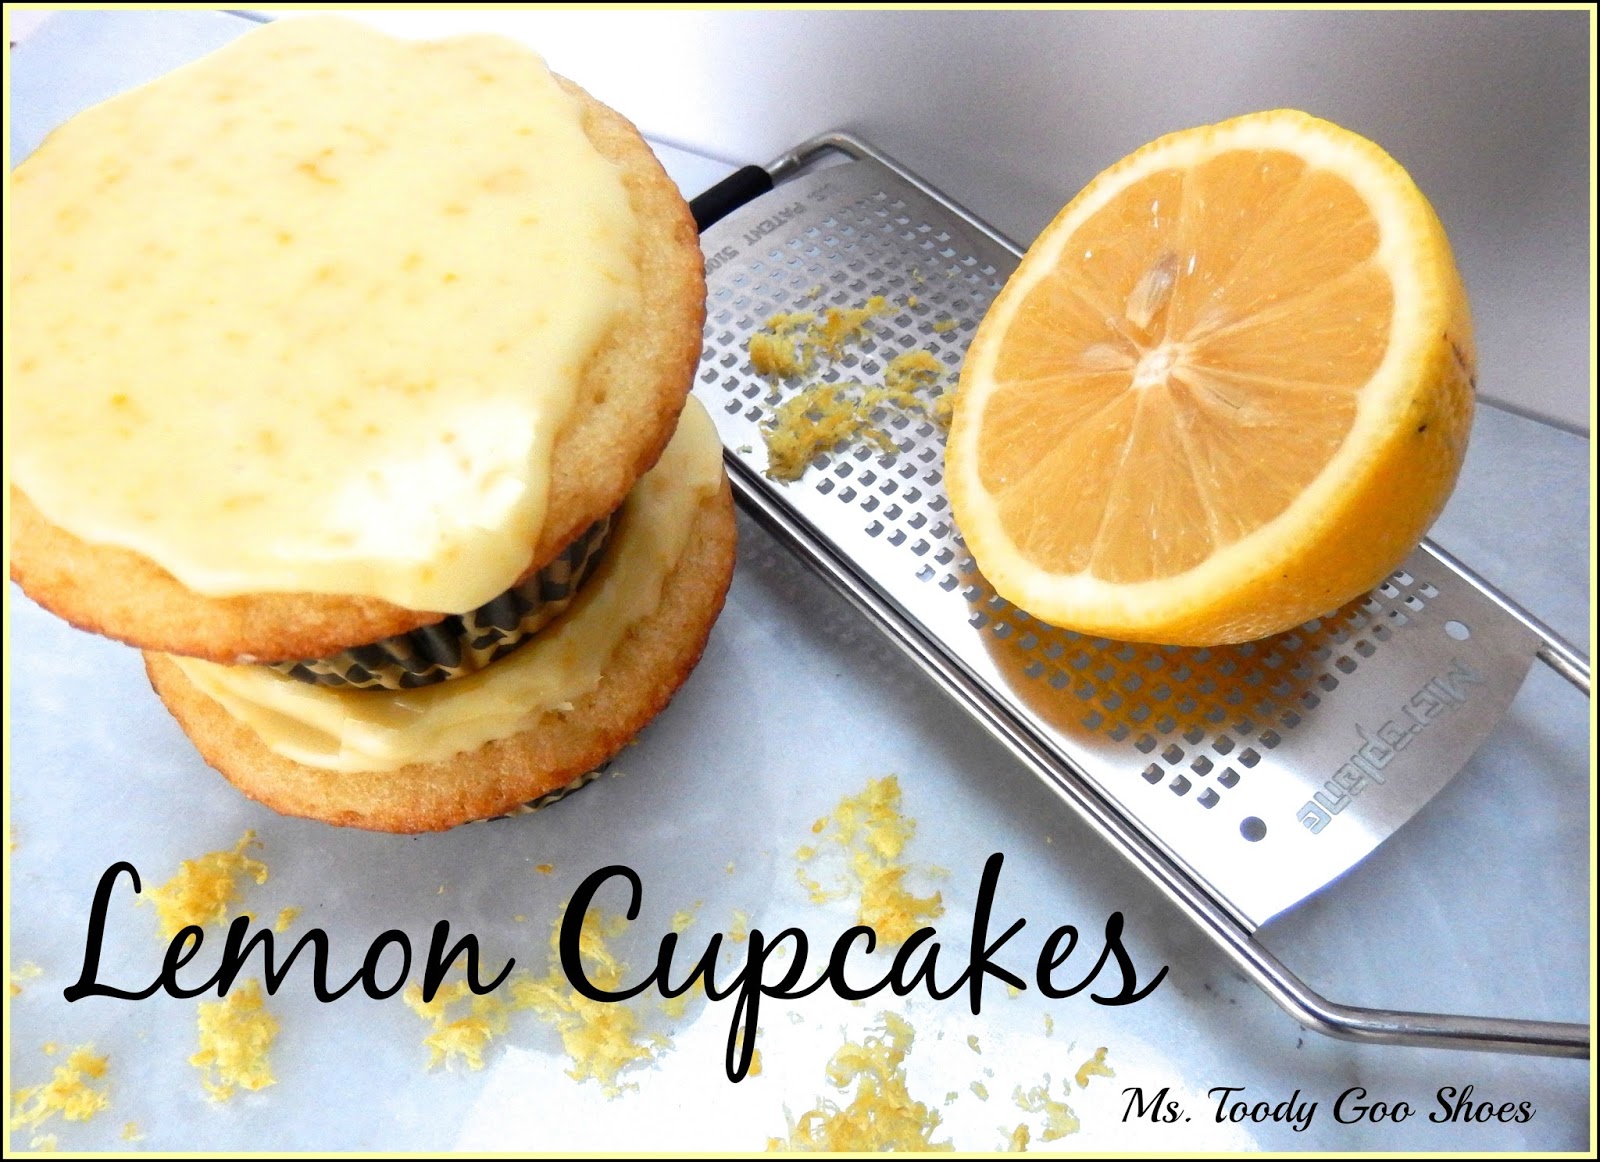 Lemon Cupcakes from Flat Belly Diet Cookbook- Ms. Toody Goo Shoes #FlatBellyCookbook